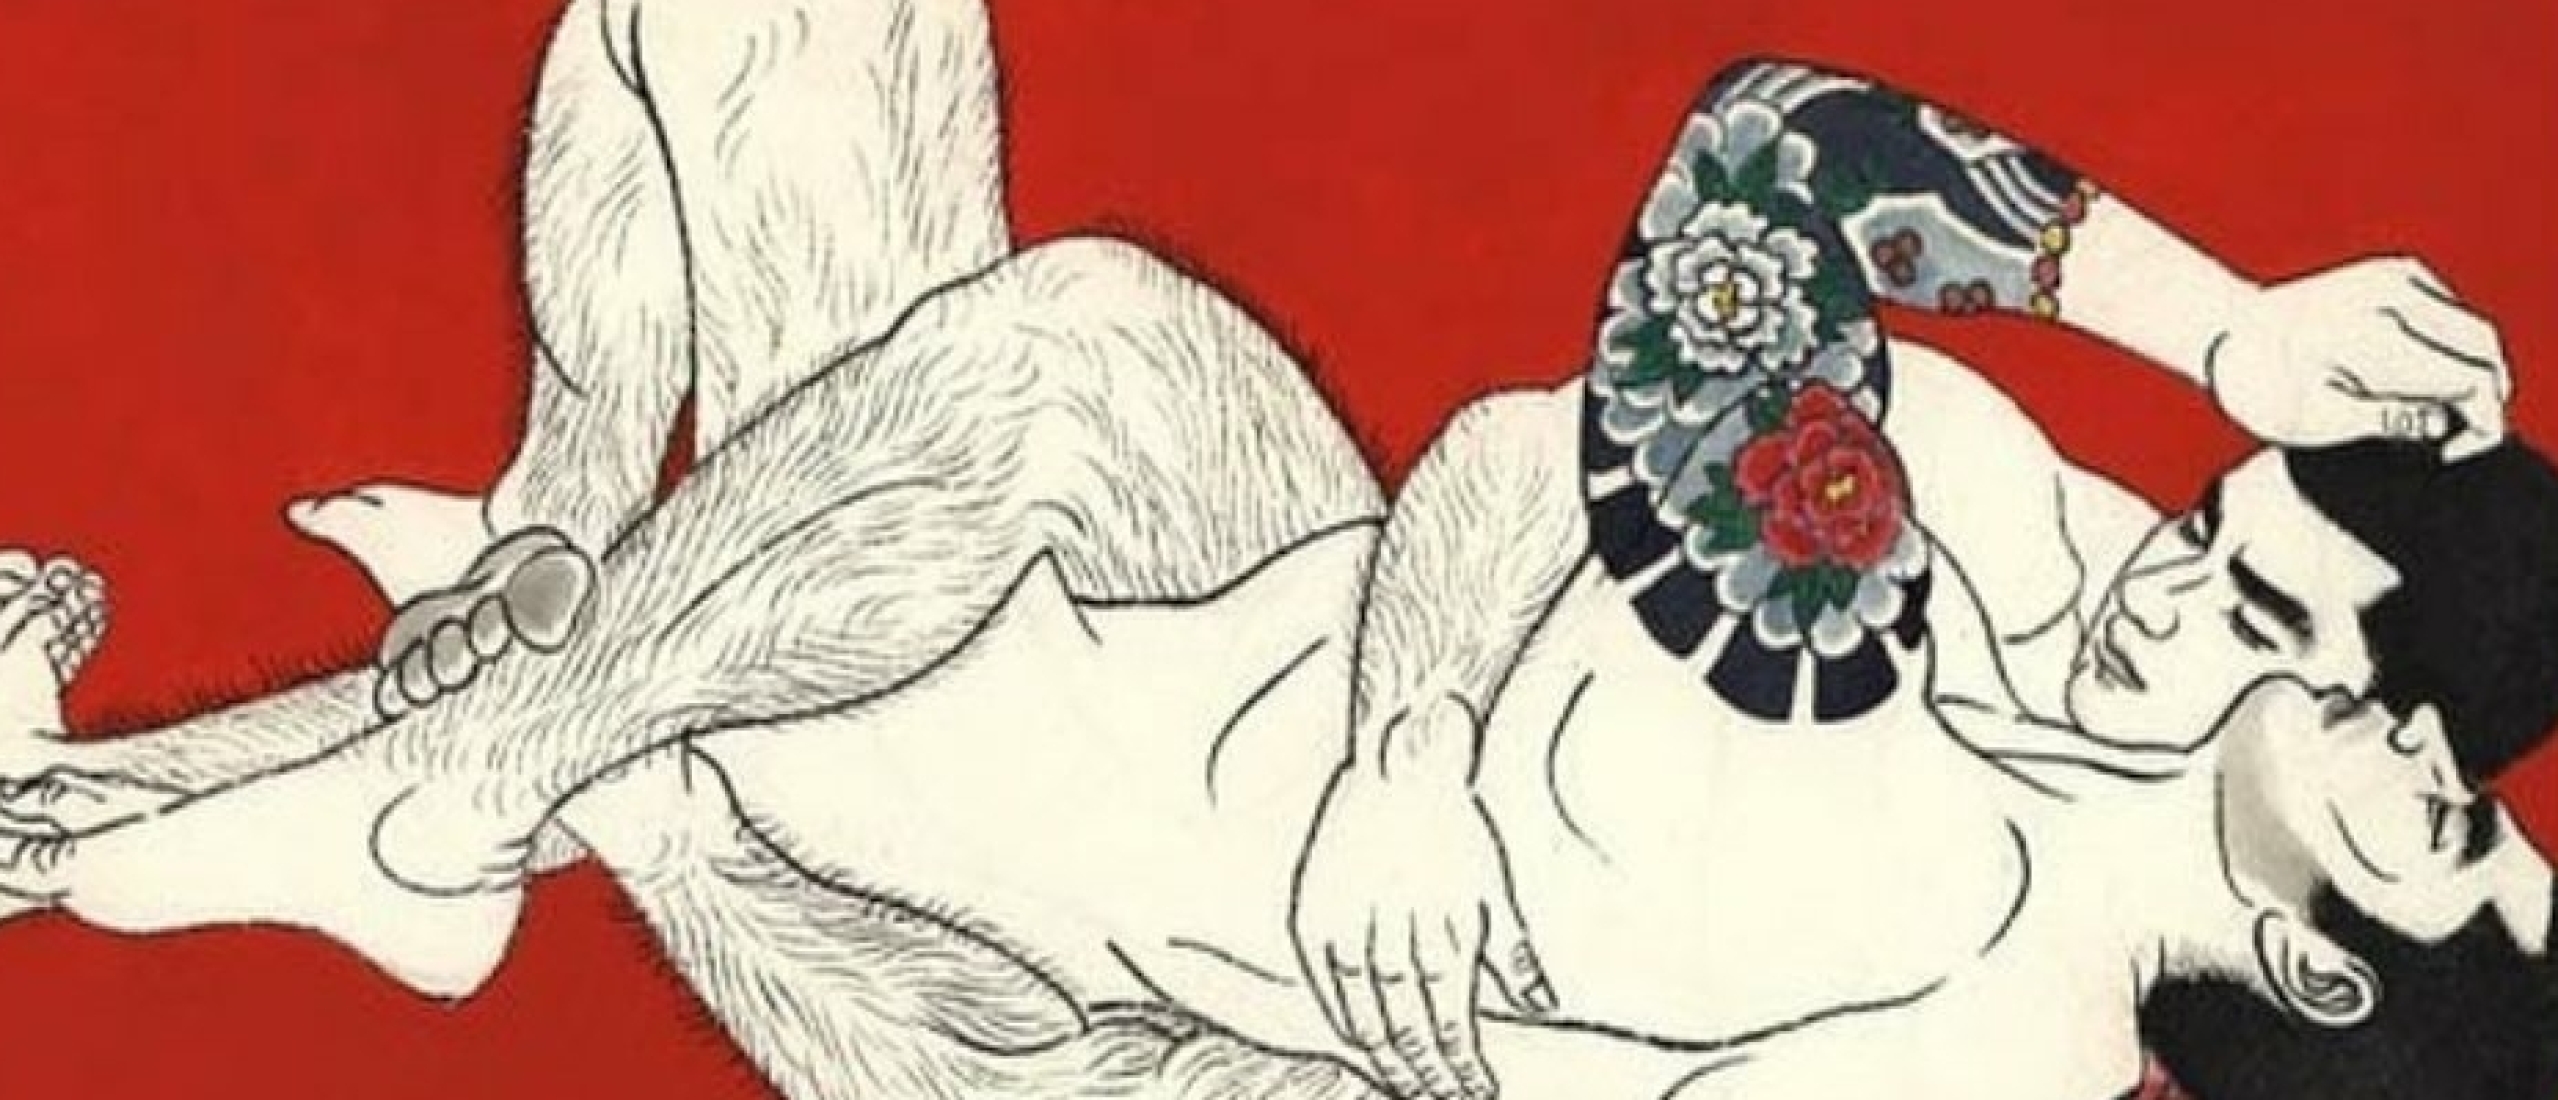 The Violent Japanese Gay Art By Goh Mishima